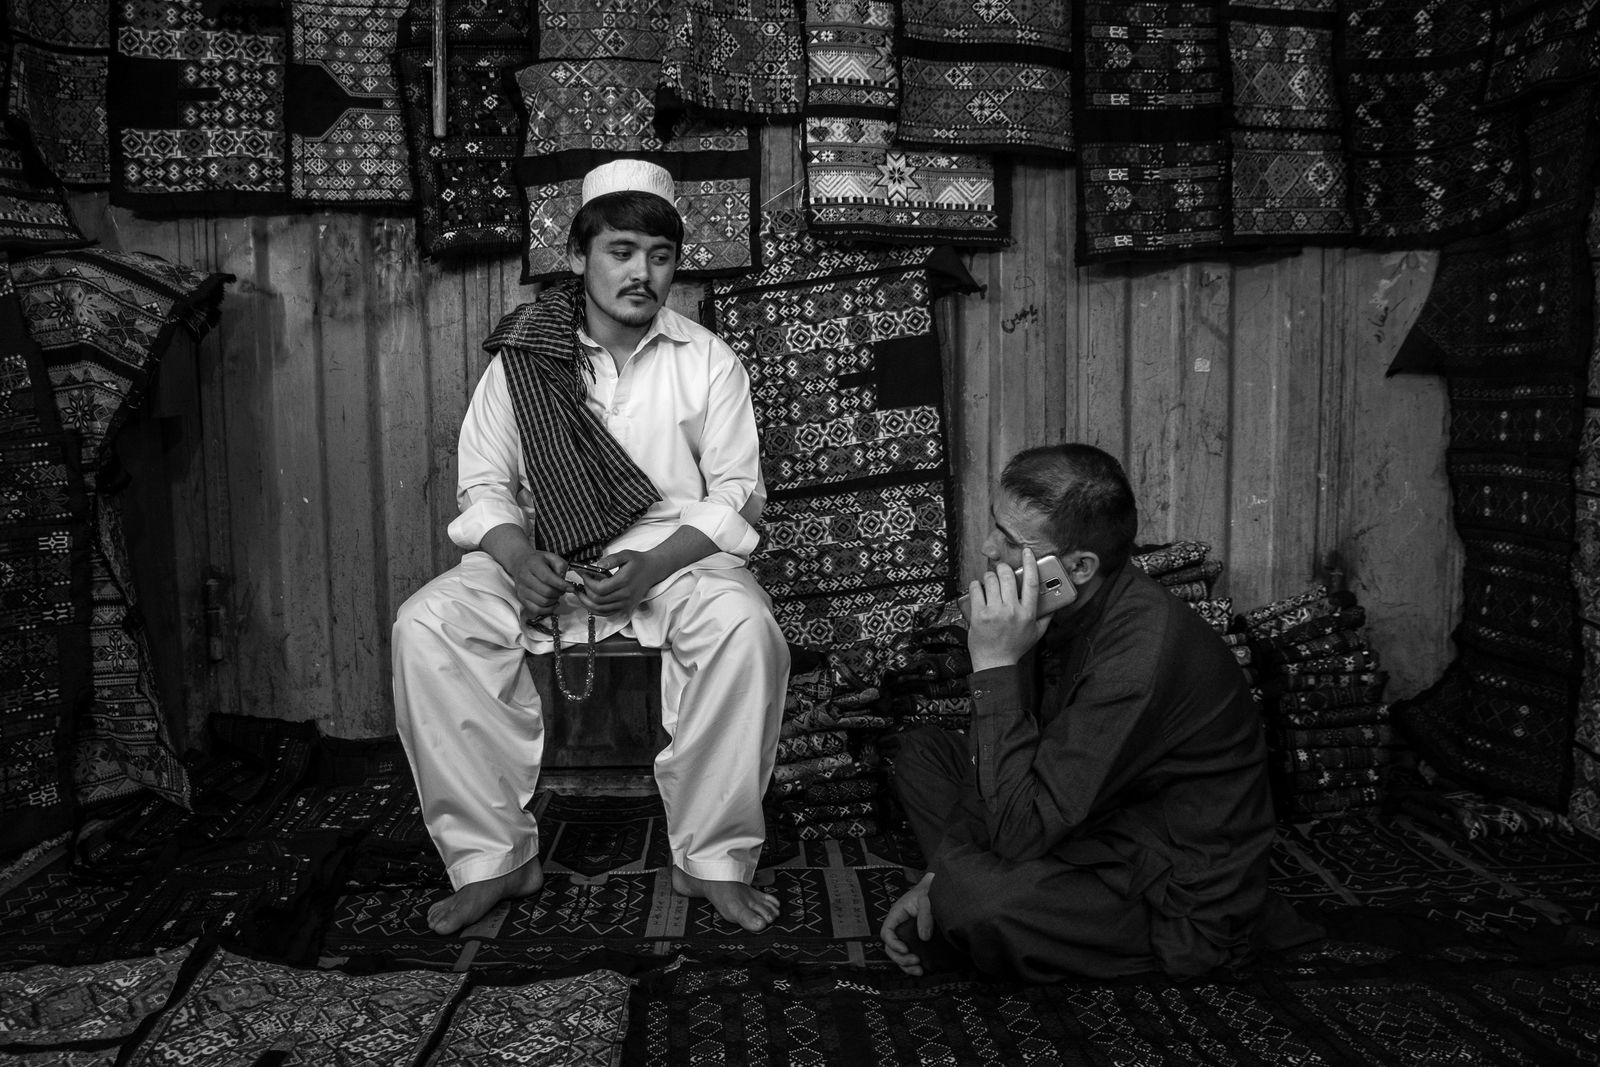 © Zobair Movahhed - Image from the Afghan Asylum Seekers in Iran photography project